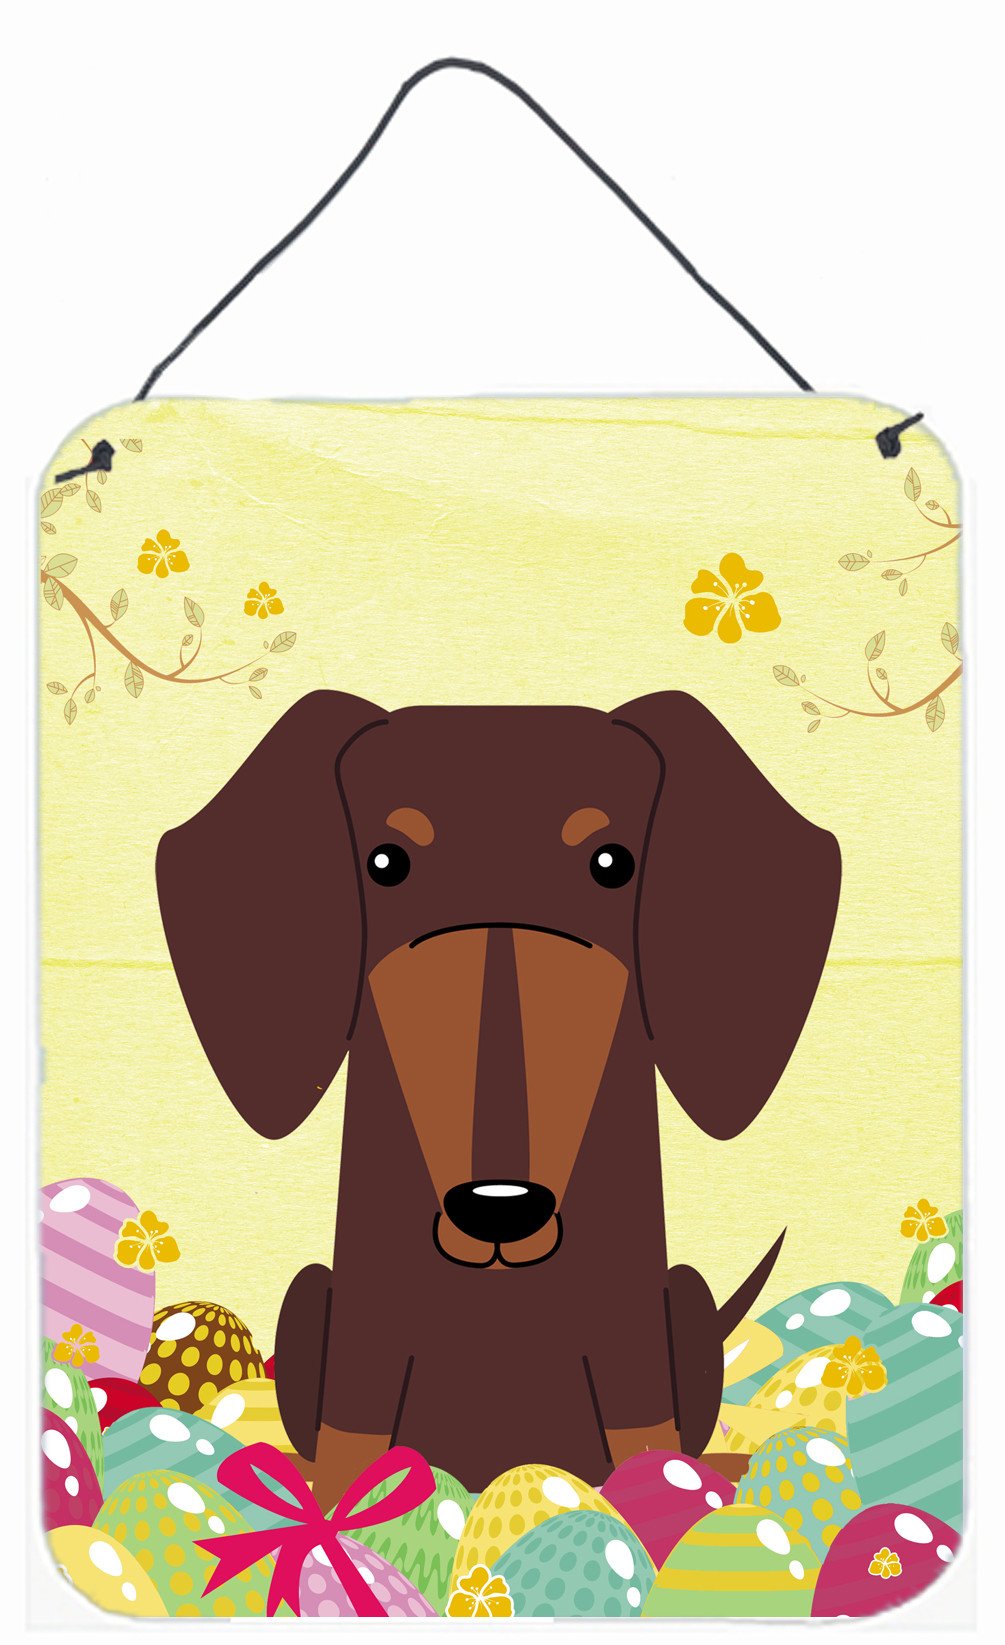 Easter Eggs Dachshund Chocolate Wall or Door Hanging Prints BB6131DS1216 by Caroline's Treasures